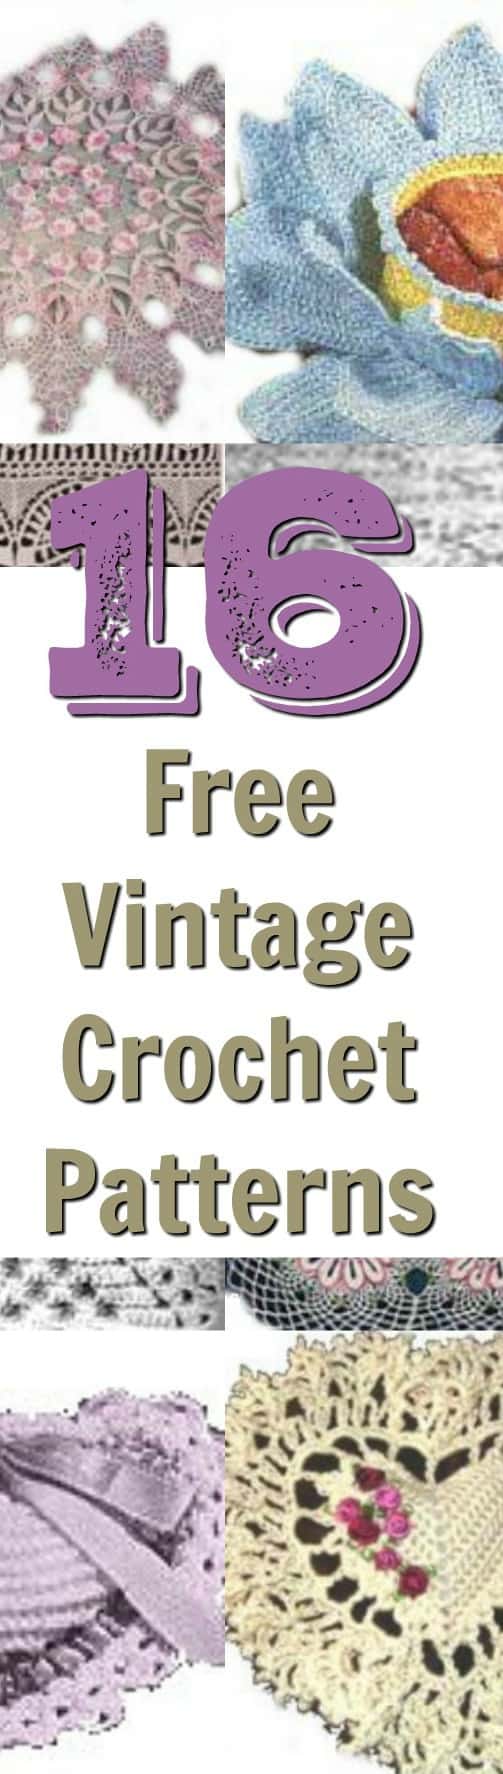 16 vintage crochet patterns - yours for free!